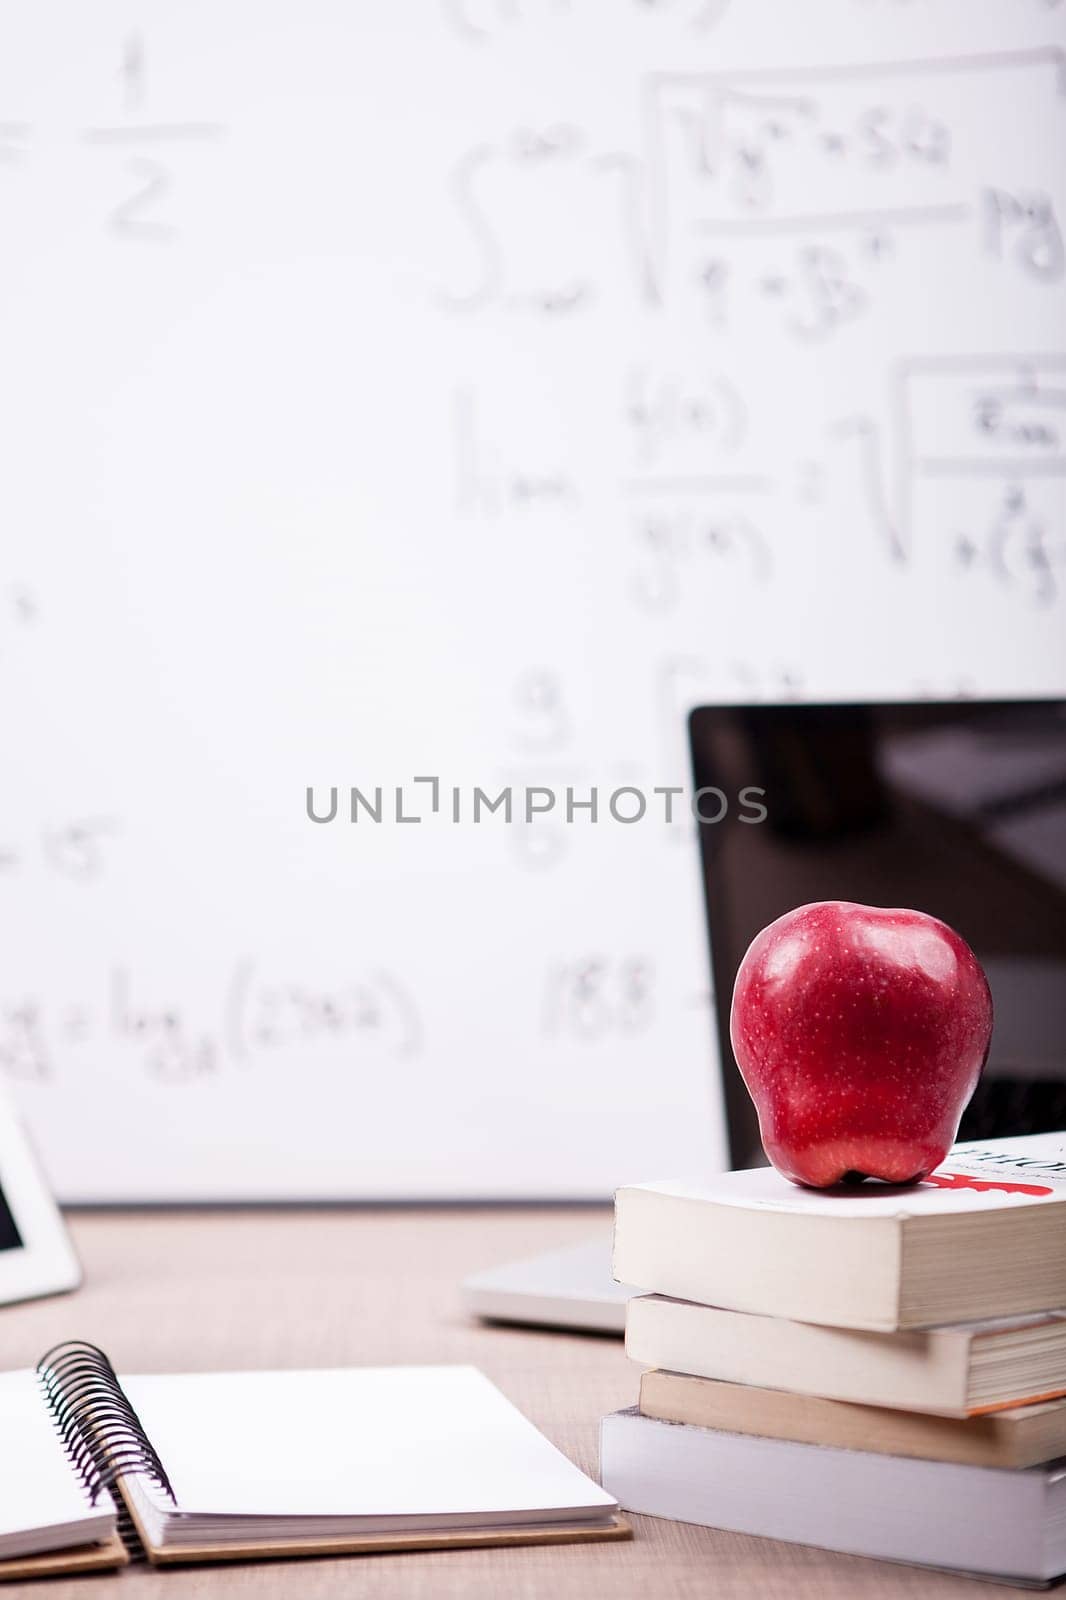 Red apple on pile of books, notebook and pencils on table with a blurred white board in the back. School concept